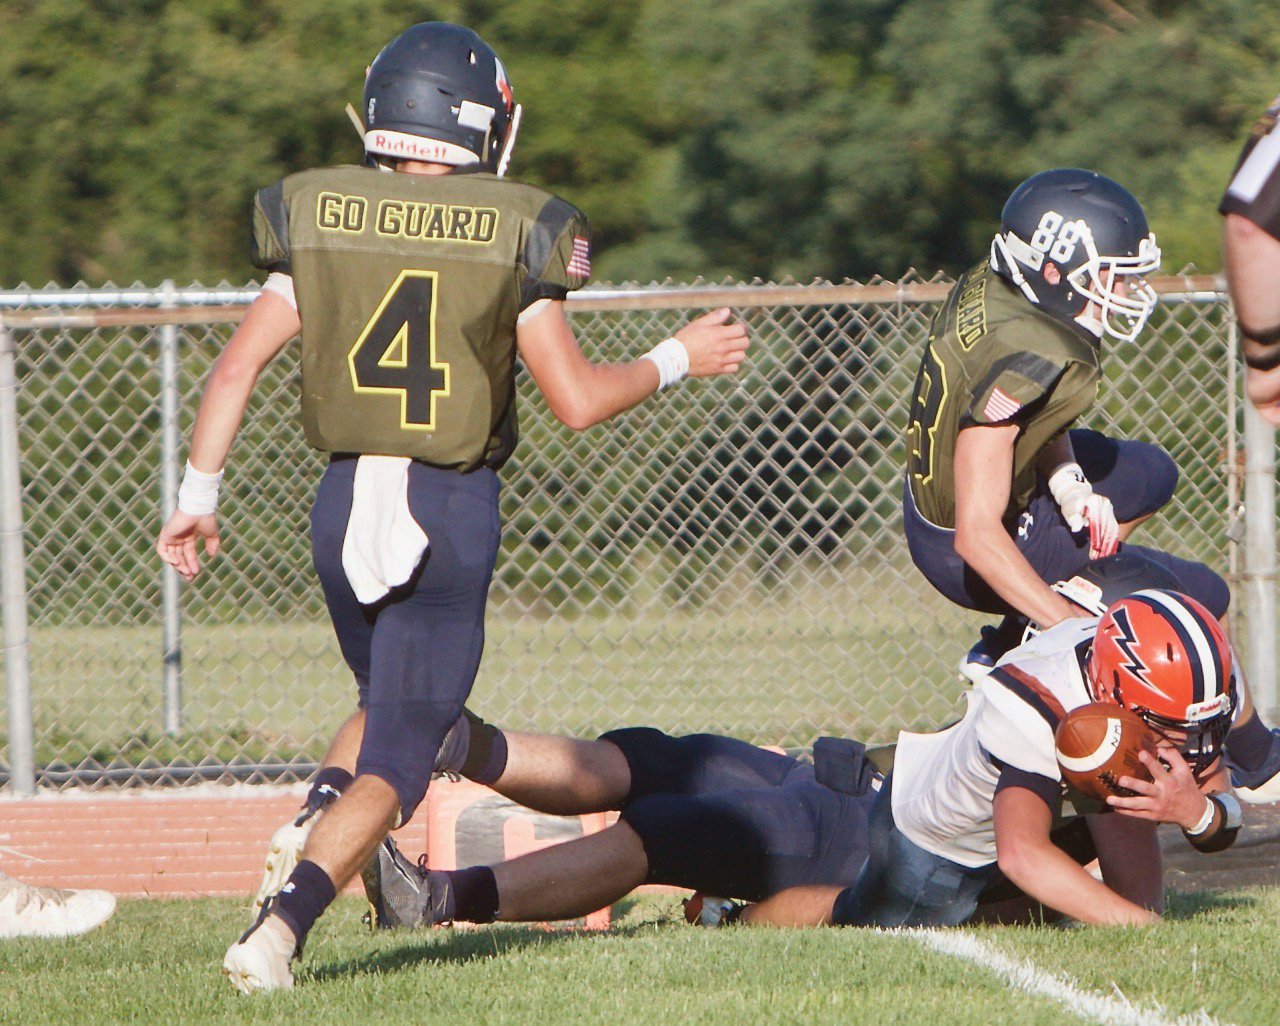 North Montgomery's Logan Kelly finds the endzone for the Chargers' first touchdown of the season.